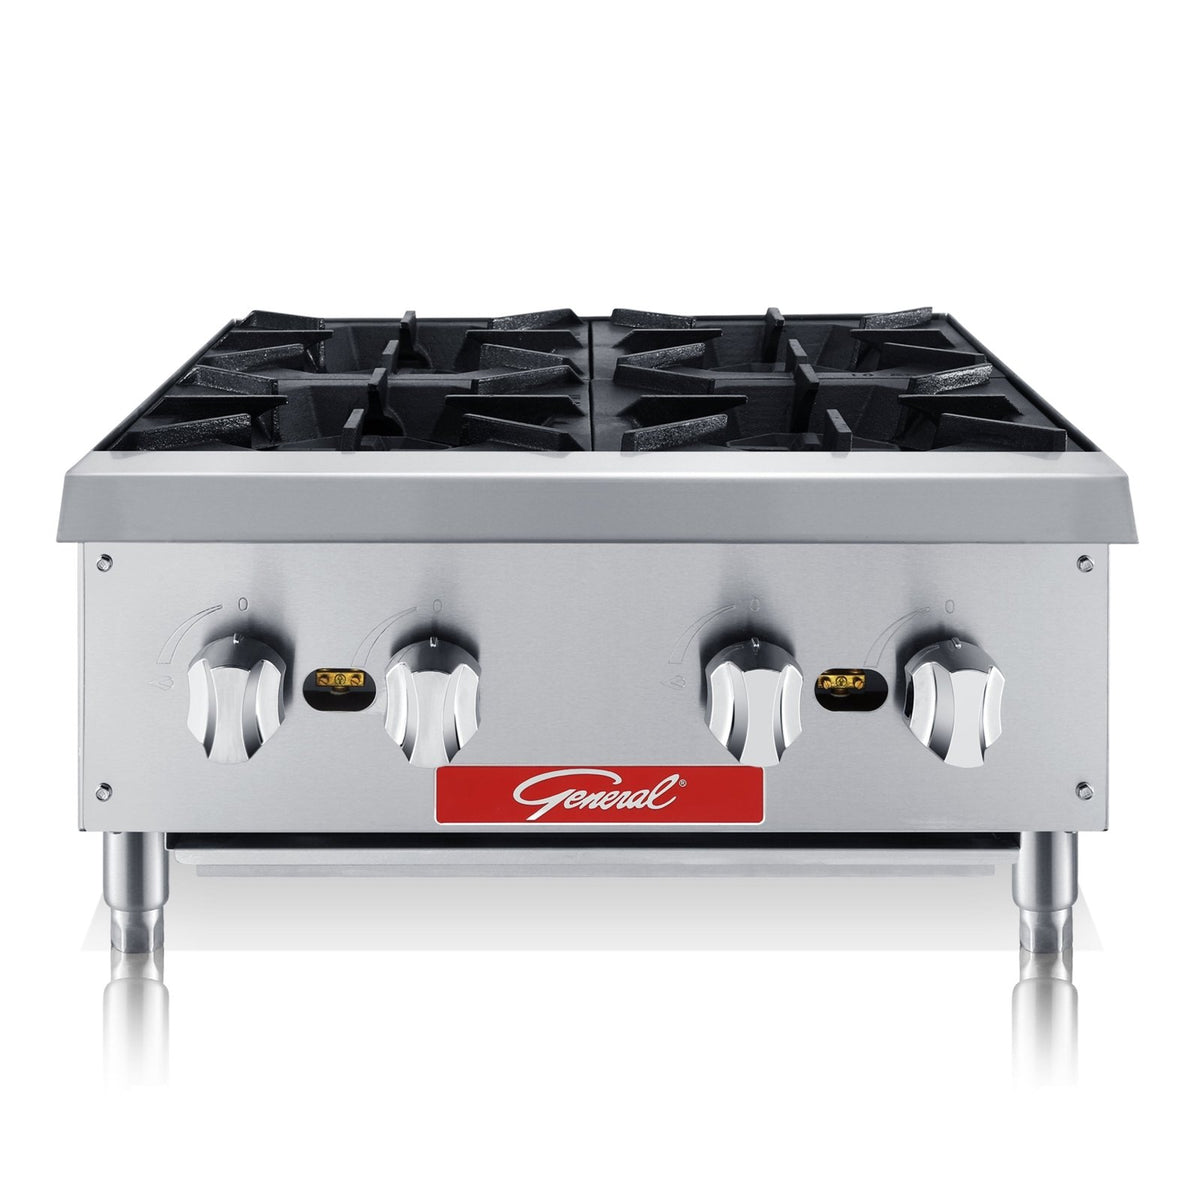 General GCHP - 24 - 4 Hot Plate, 4 Burners, 100,000 BTUs, 24", in Stainless Steel (GCHP - 24 - 4LP) - TheChefStore.Com